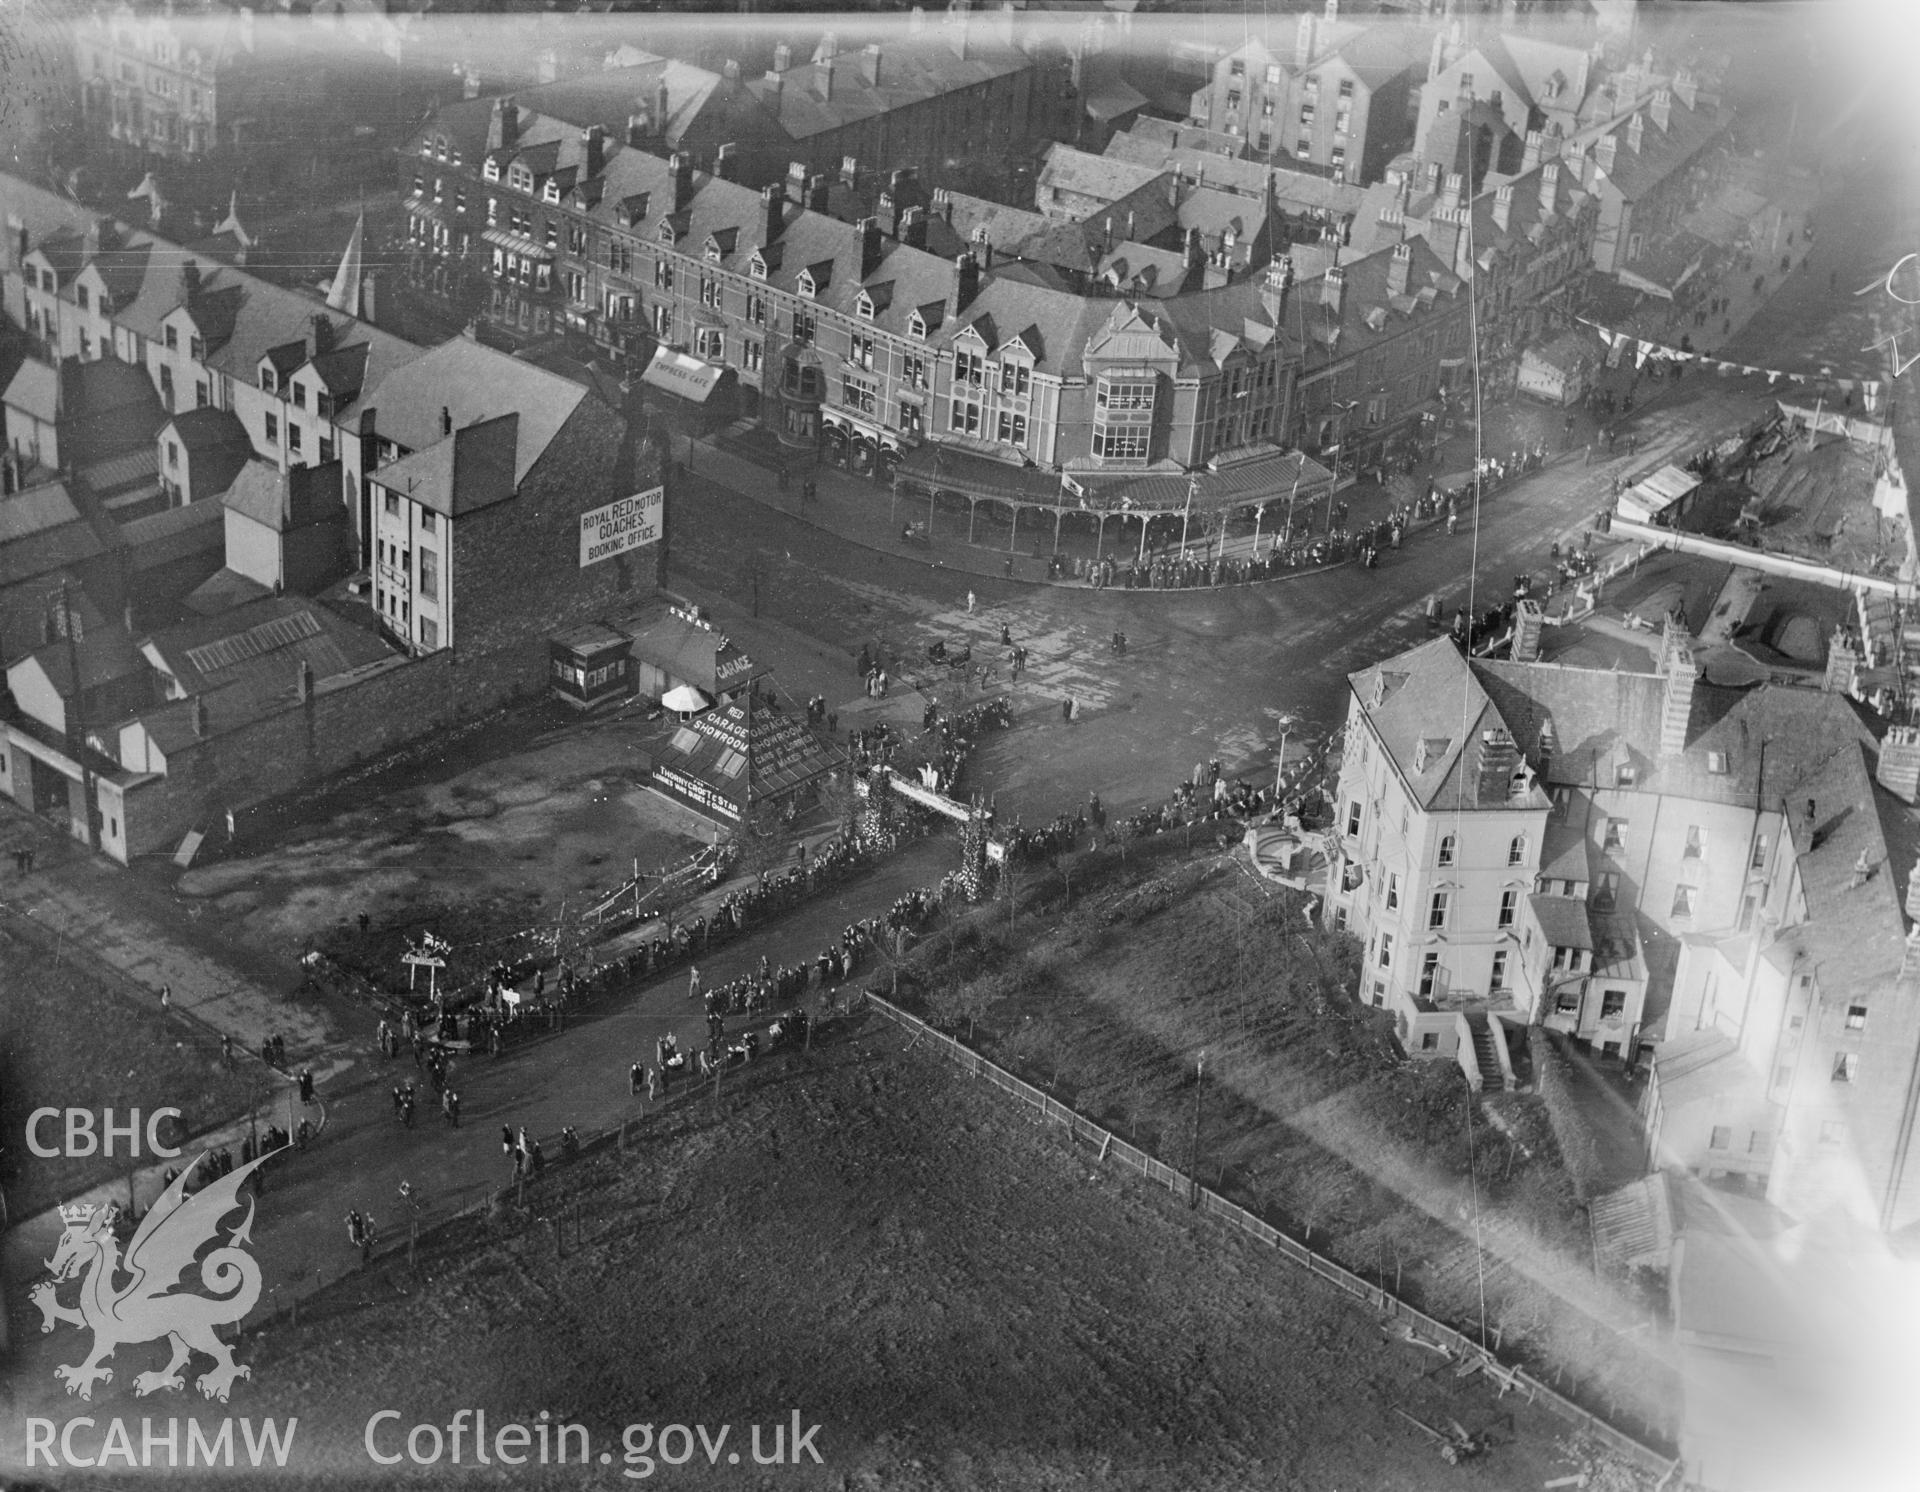 Llandudno streets taken during the visit of the Prince of Wales (later Edward VIII) in November 1923, oblique aerial view. 5?x4? black and white glass plate negative.